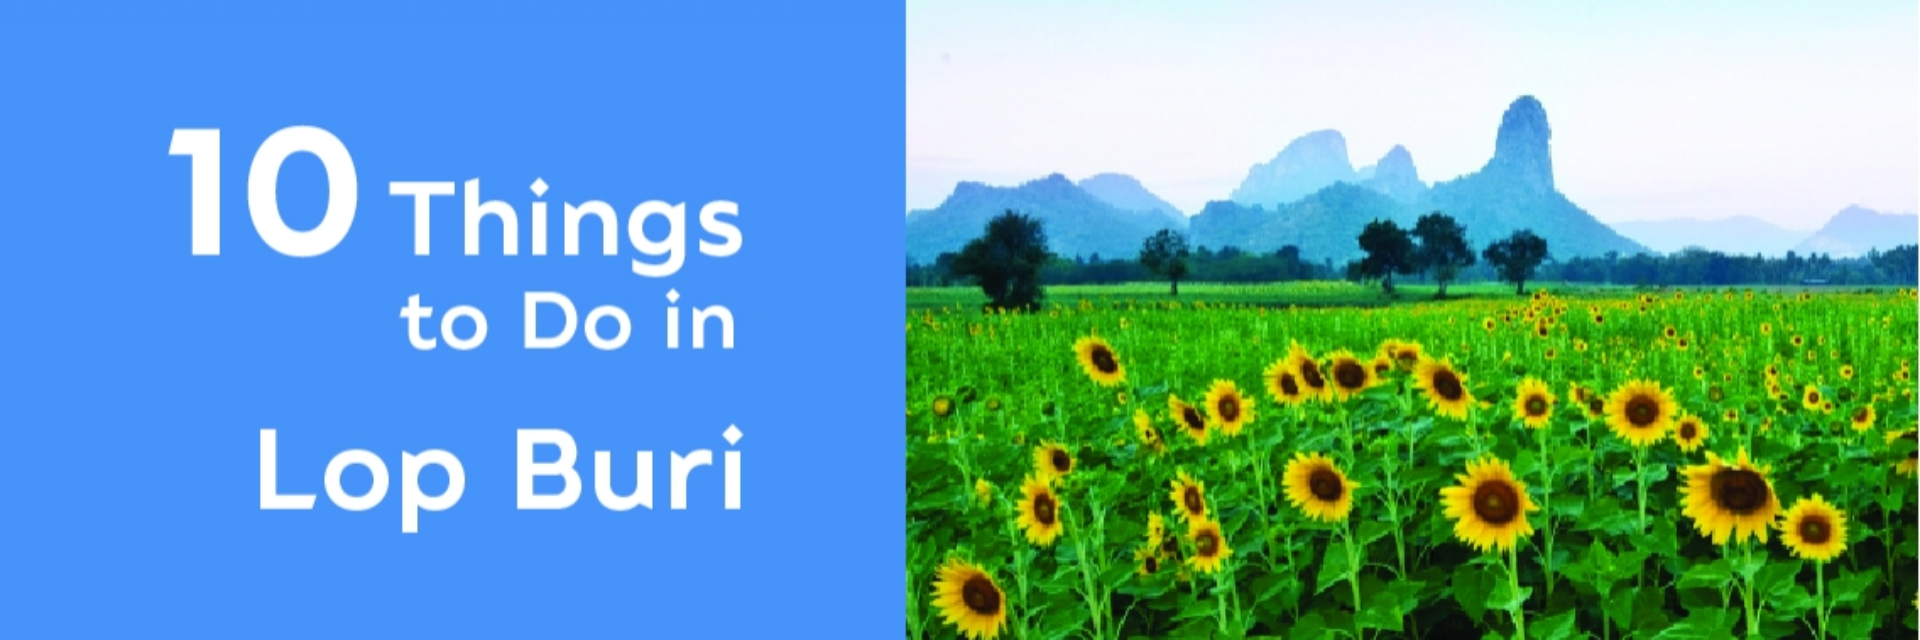 10 THINGS TO DO IN LOP BURI